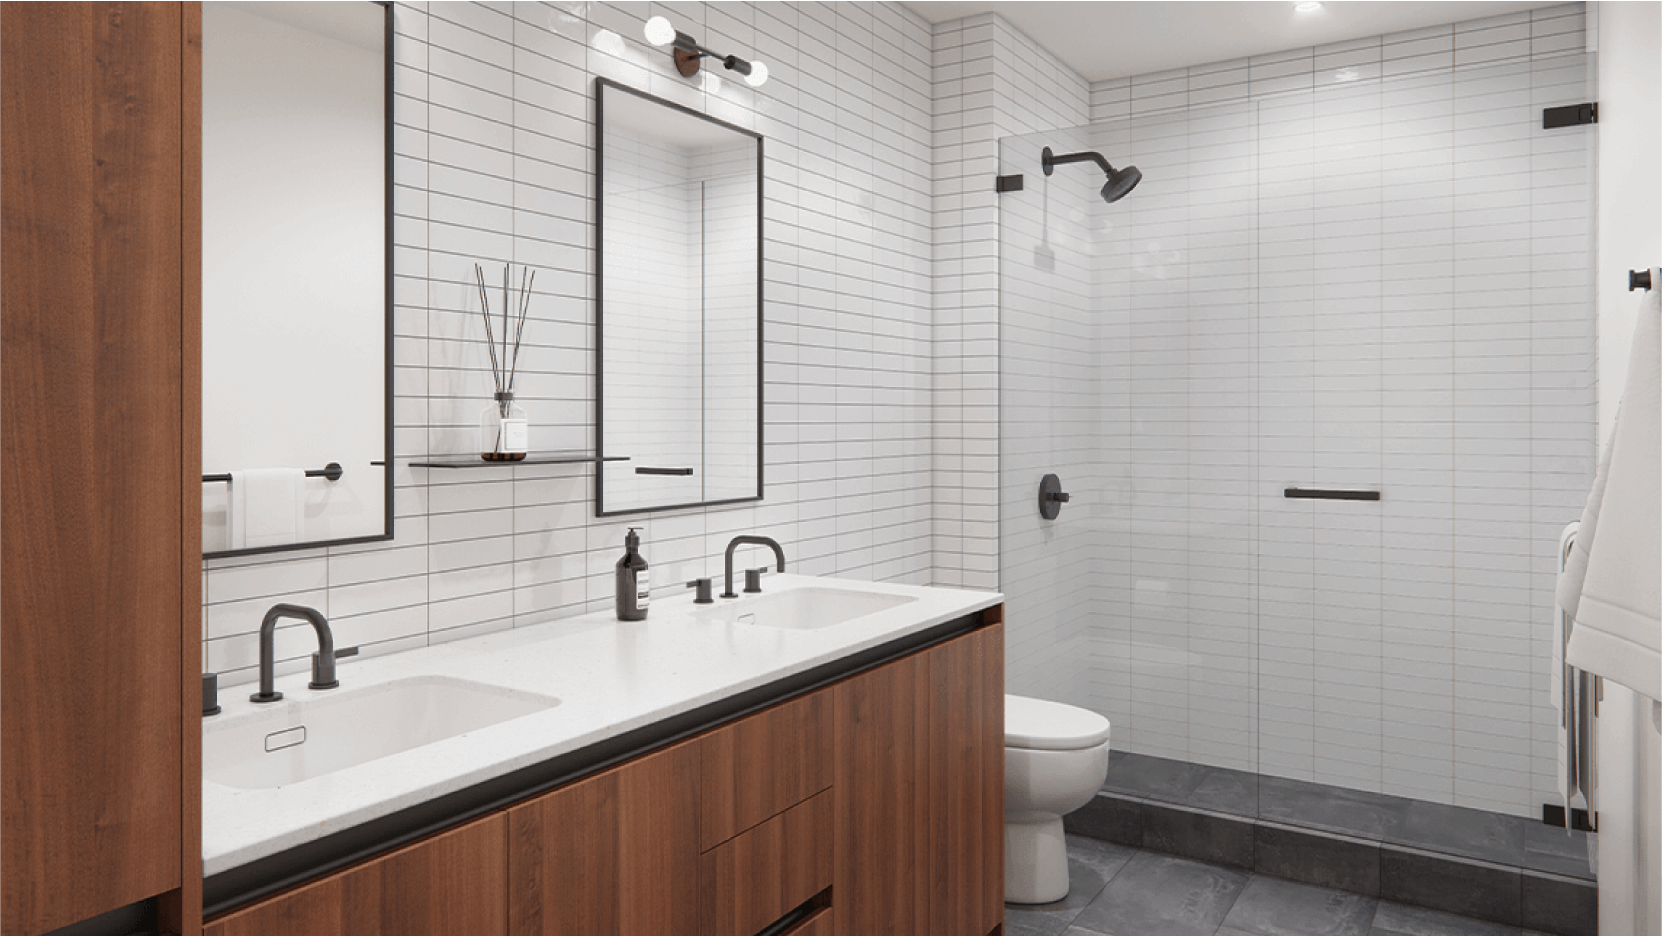 Minimalist design bathroom with a sophisticated double vanity, black fixtures, and a glass-enclosed shower, reflecting upscale urban living in Austin.